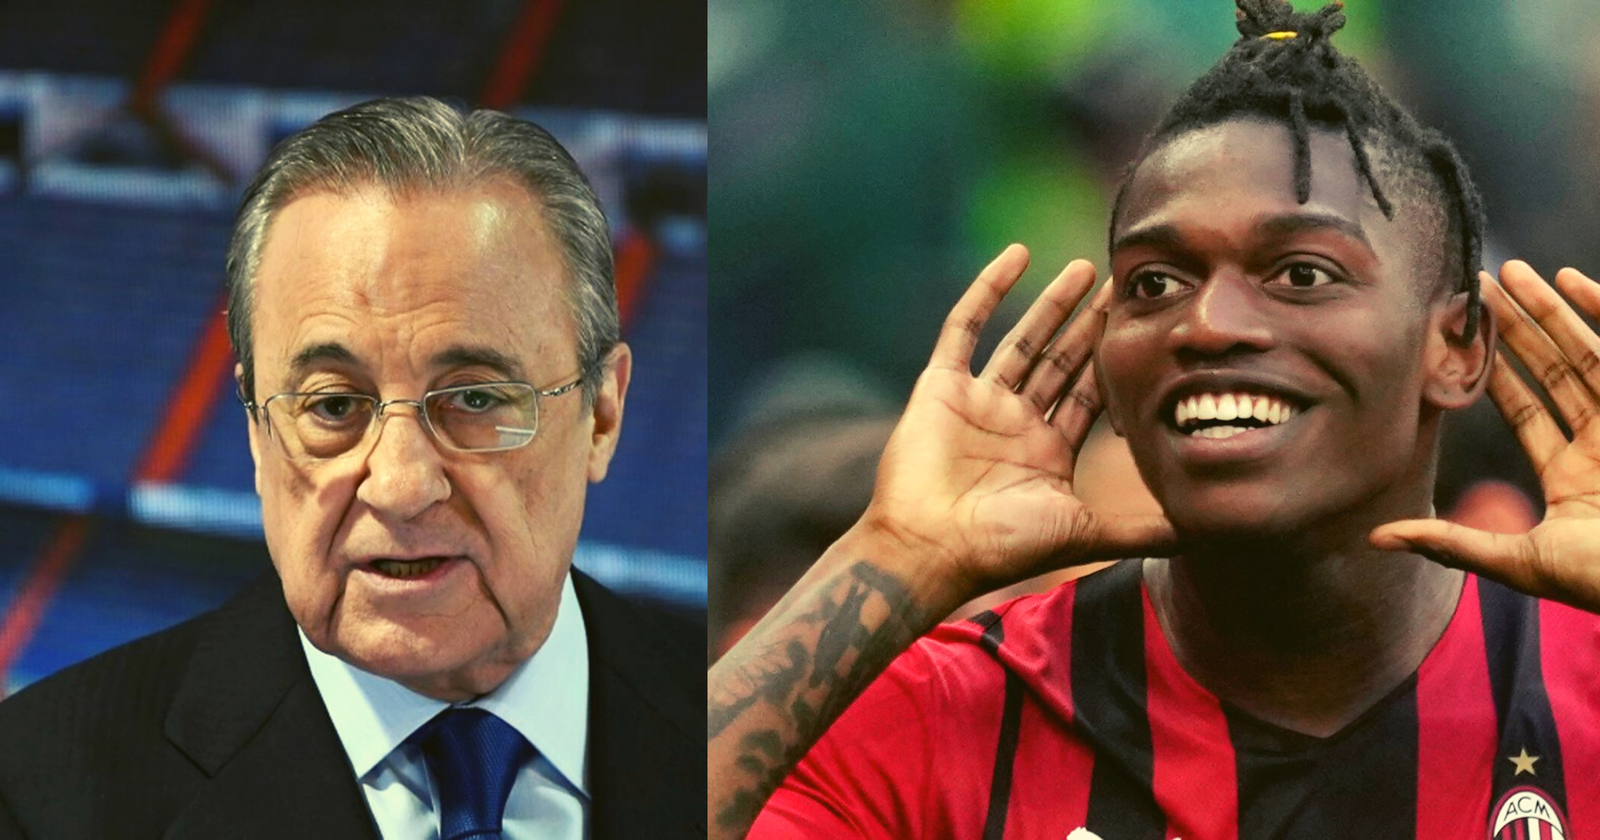 REPORTS: Real Madrid Has Offered One Of Their Player To Get Rafael Leao